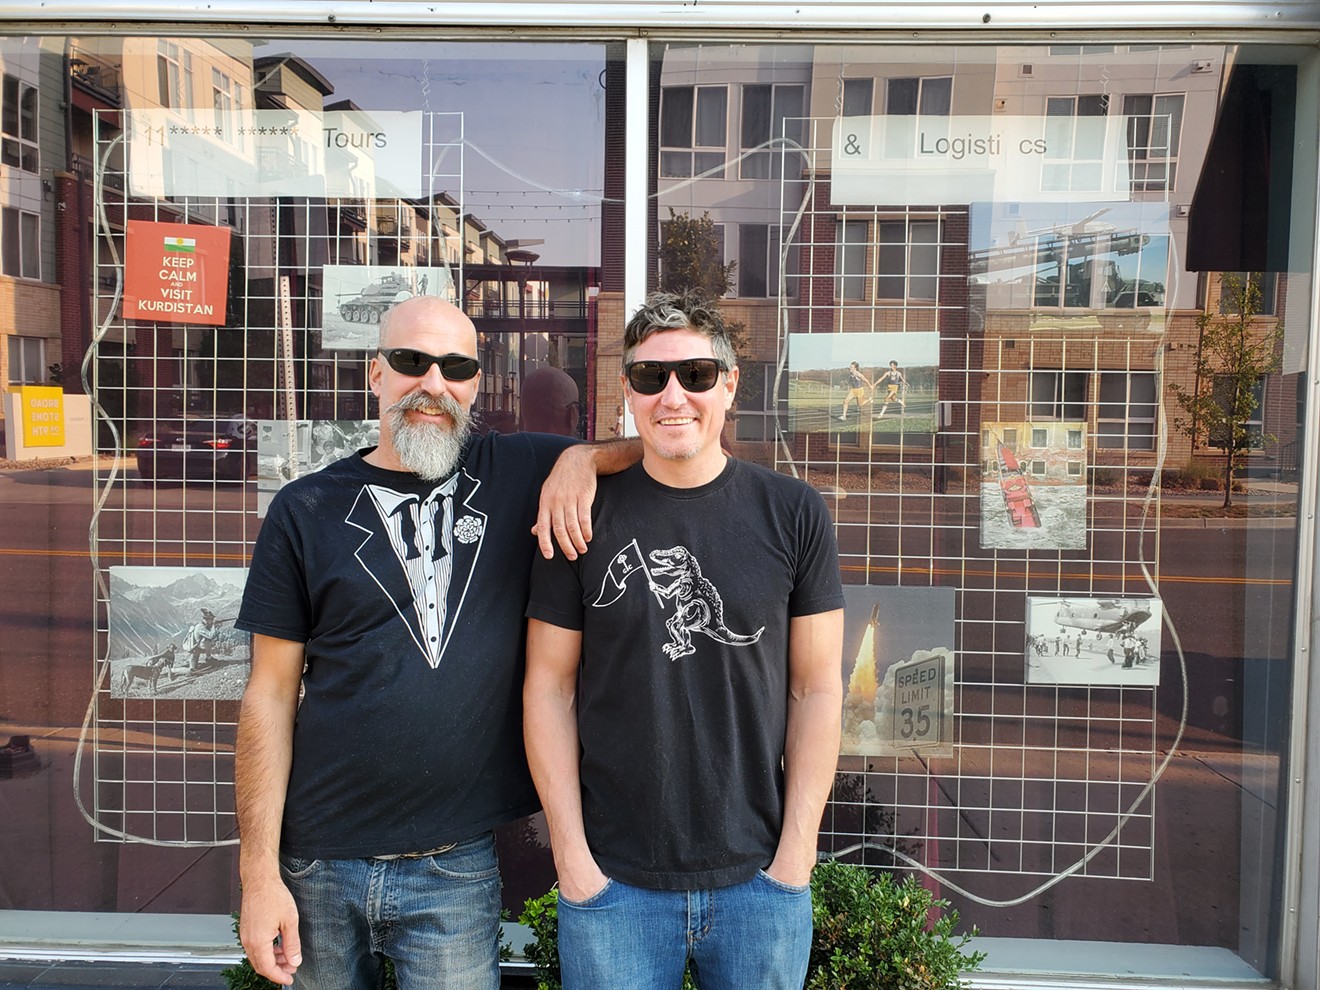 Gregg Lockwood and Joe Schindler are the owners of Gaijin Omakase.